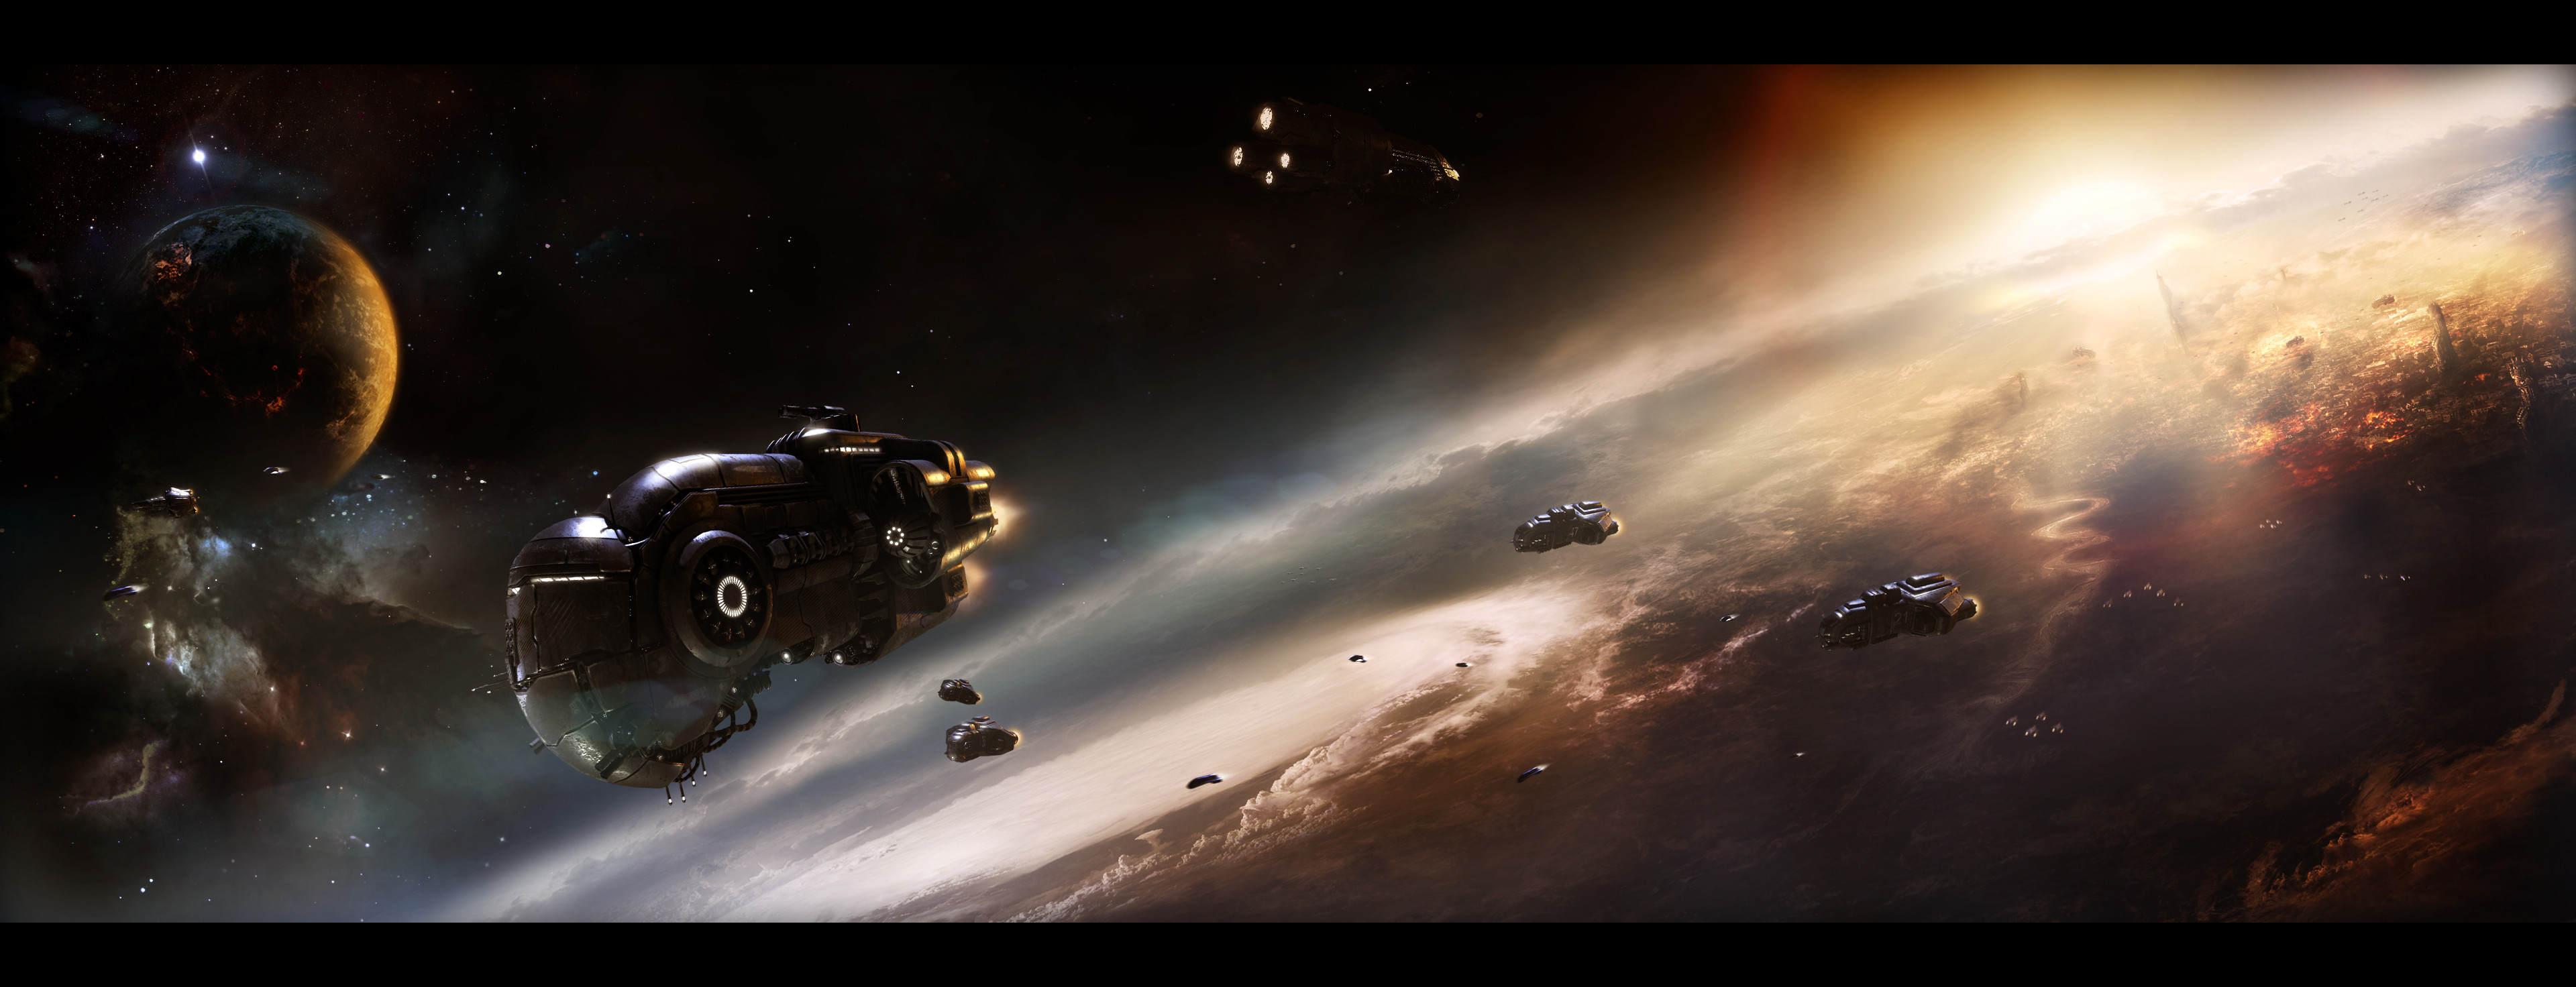 General 3840x1472 science fiction high tech space planet Sun spaceship sky stars storm clouds